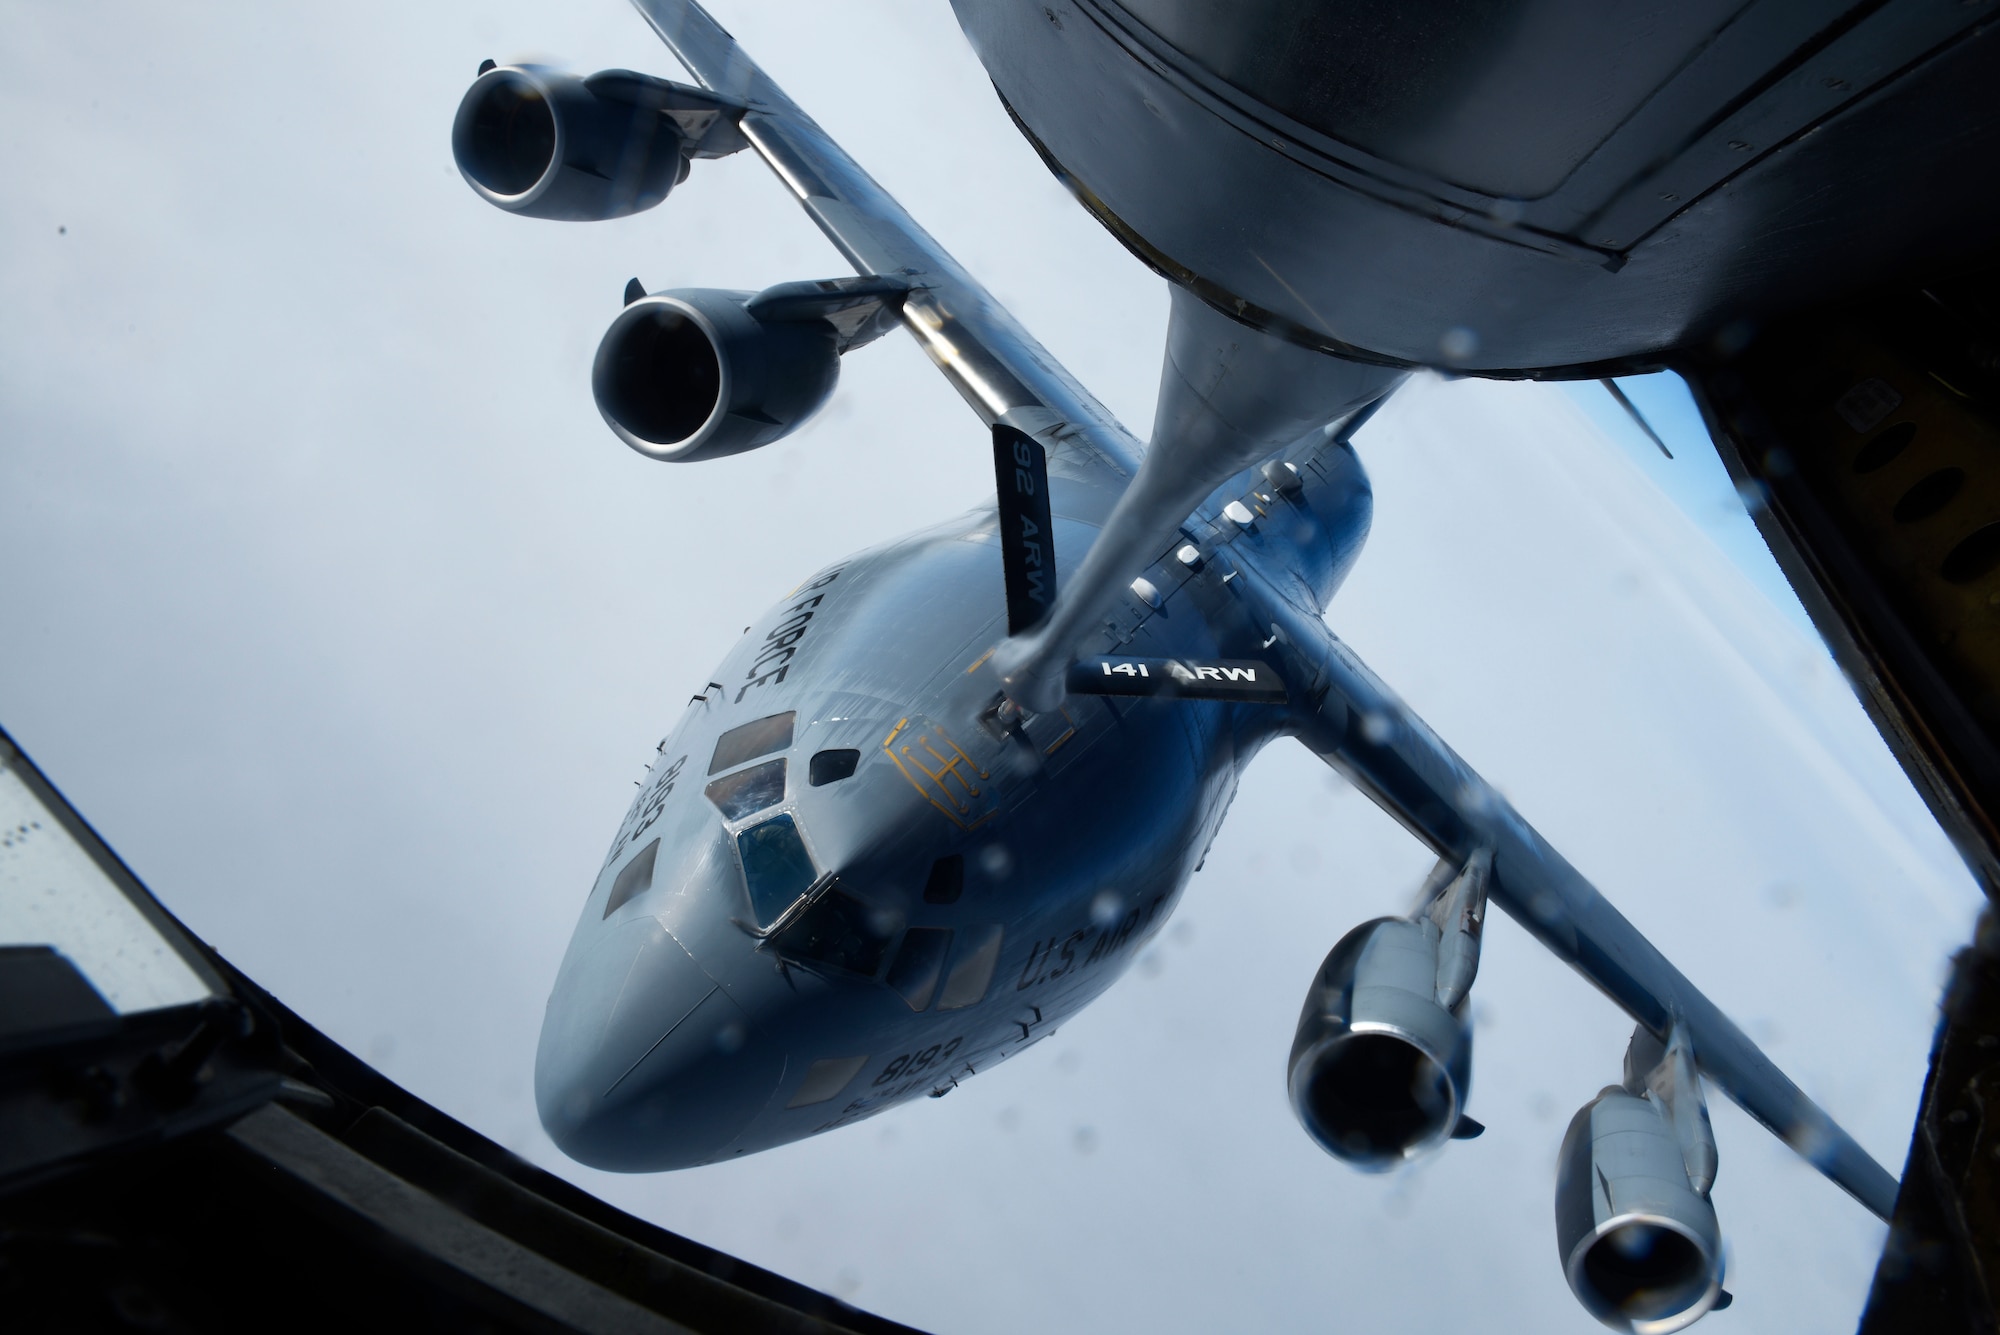 A KC-135 Stratotanker from the 92nd Air Refueling Wing performs an air refueling mission with a 97th Airlift Squadron C-17 Globemaster III during the 97th Air Refueling Squadron’s first mission over the skies of Washington, Jan. 13, 2020. Refueling the C-17 served as a training mission for aircrew Airmen from both aircraft, and included air refueling training contacts as well as simulated emergency separation procedures, ensuring mission readiness. (U.S. Air Force photo by Senior Airman Lawrence Sena)